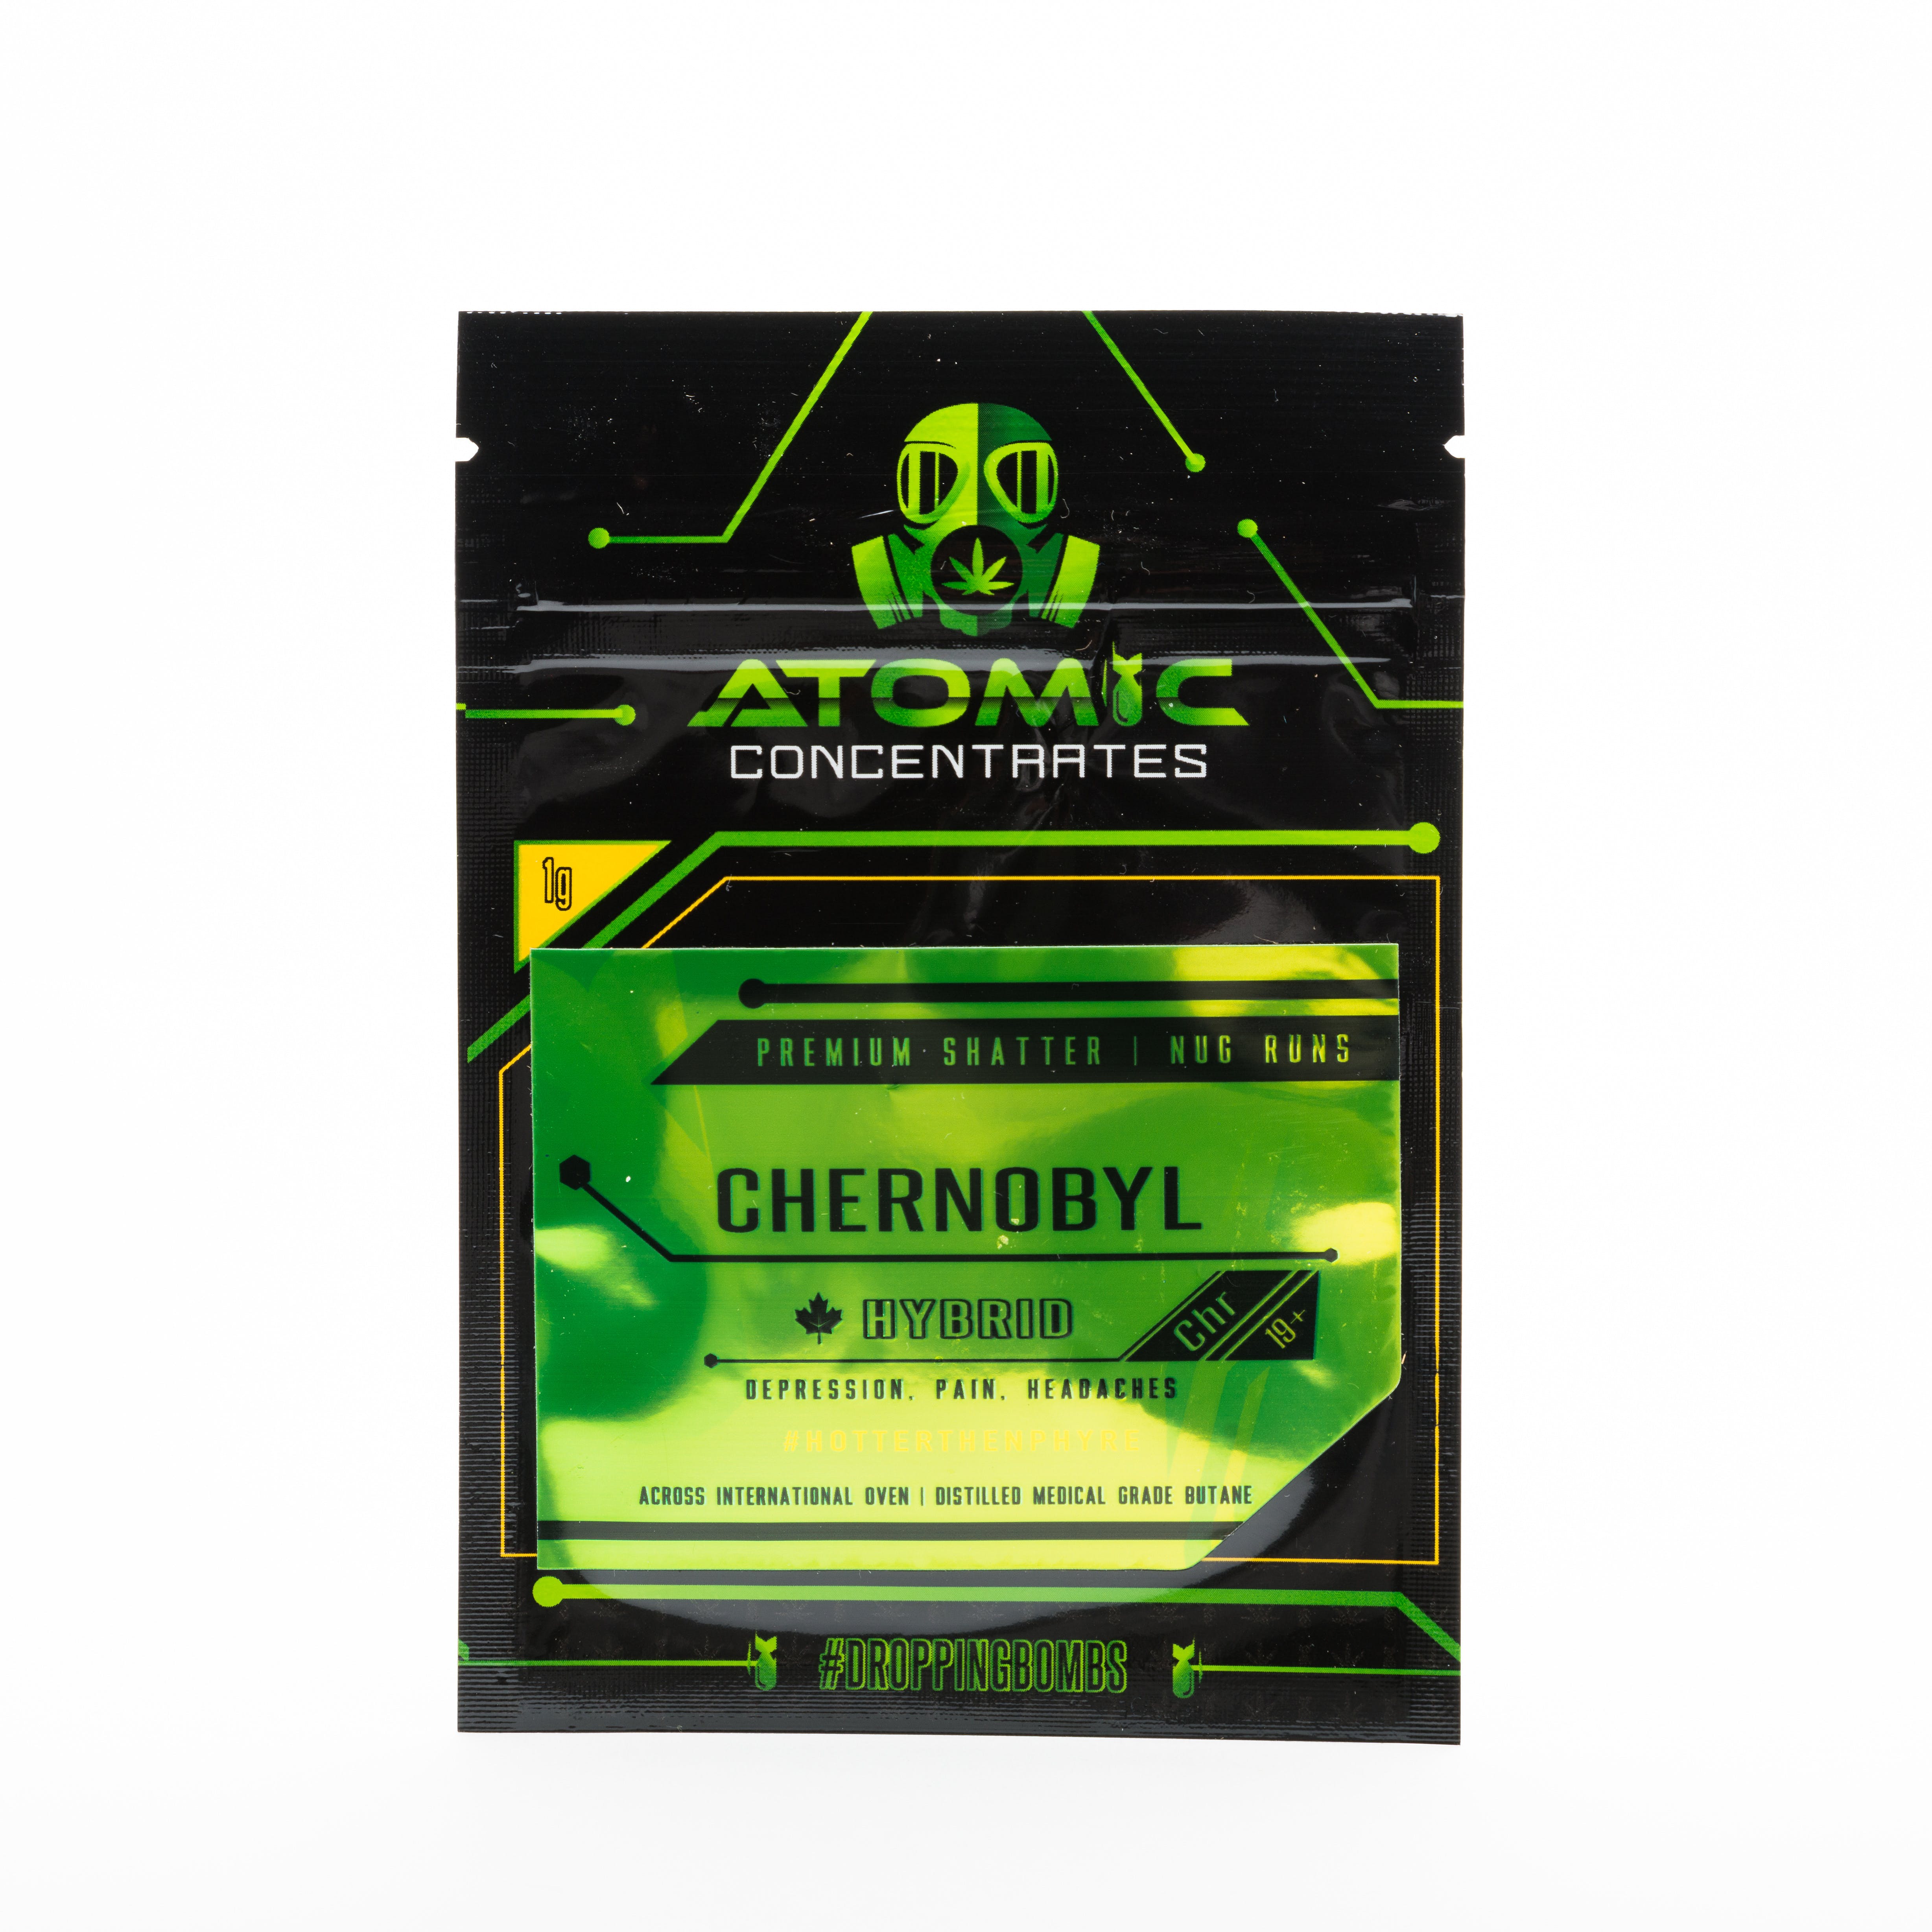 Atomic Concentrates - Chernobyl